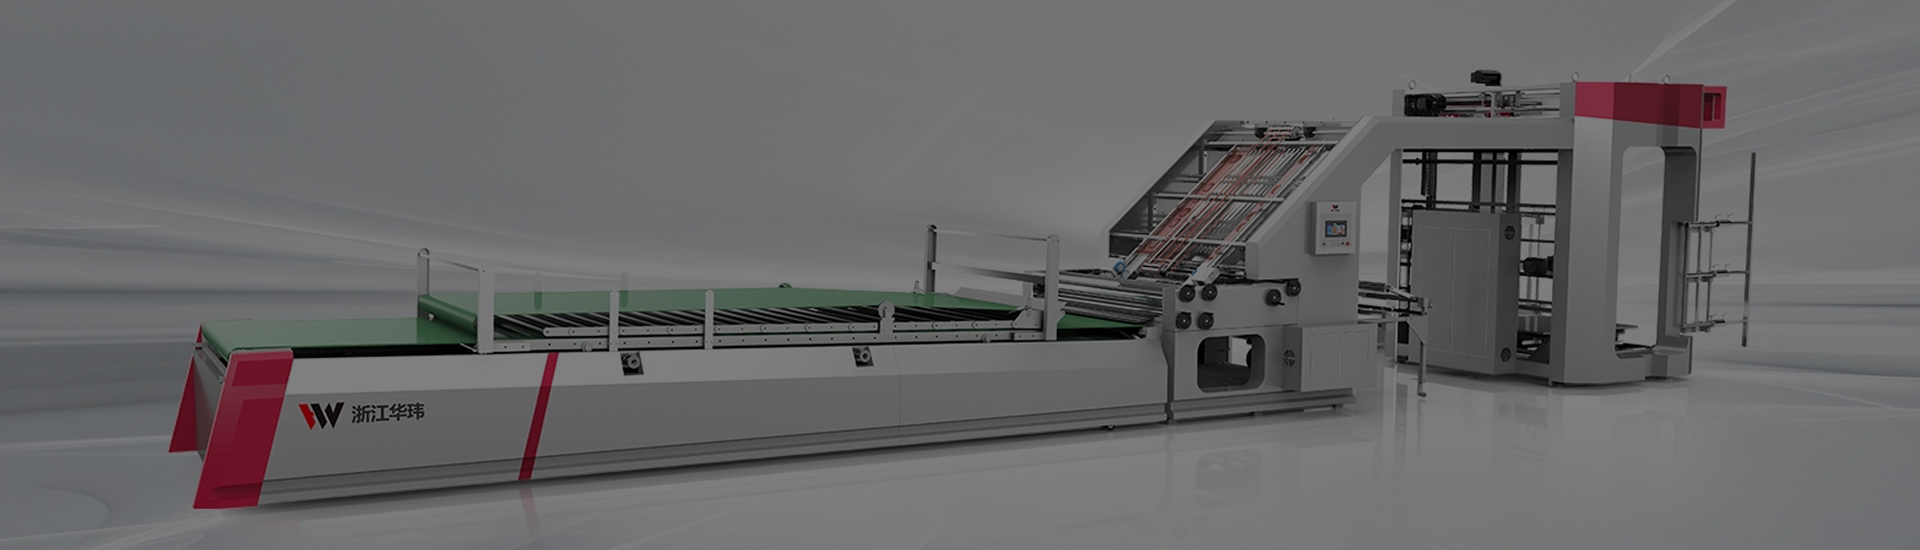 Specialize In The Production Of Post- press Packaging Equipment